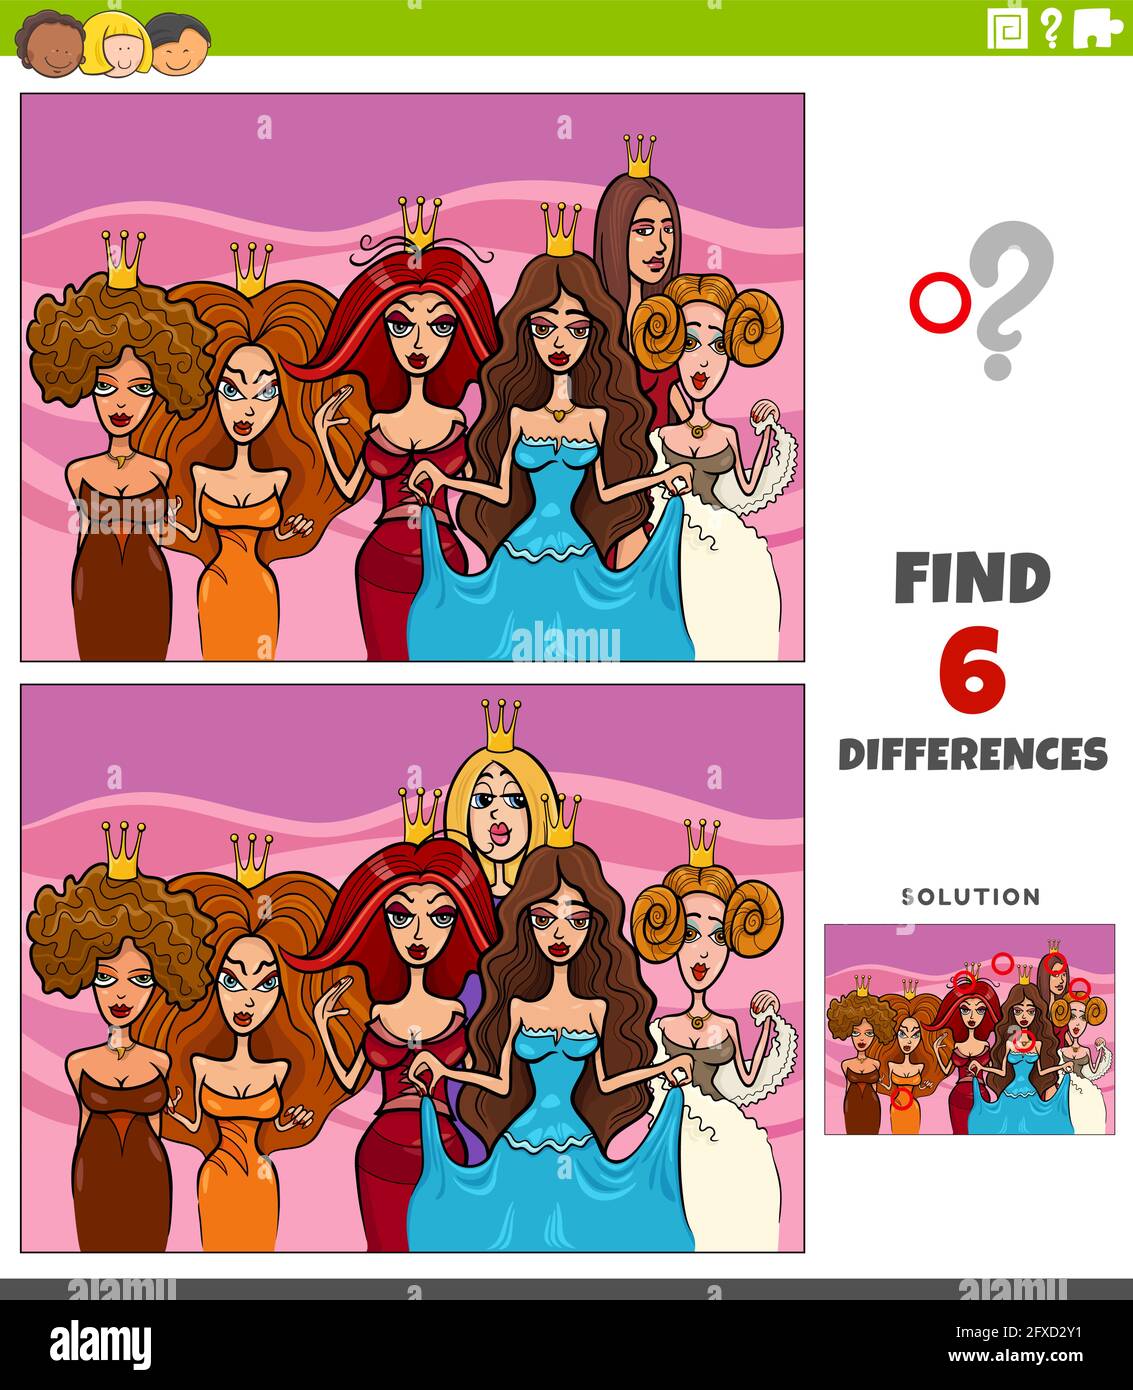 Cartoon illustration of finding the differences between pictures educational game for children with queens or princesses characters group Stock Vector